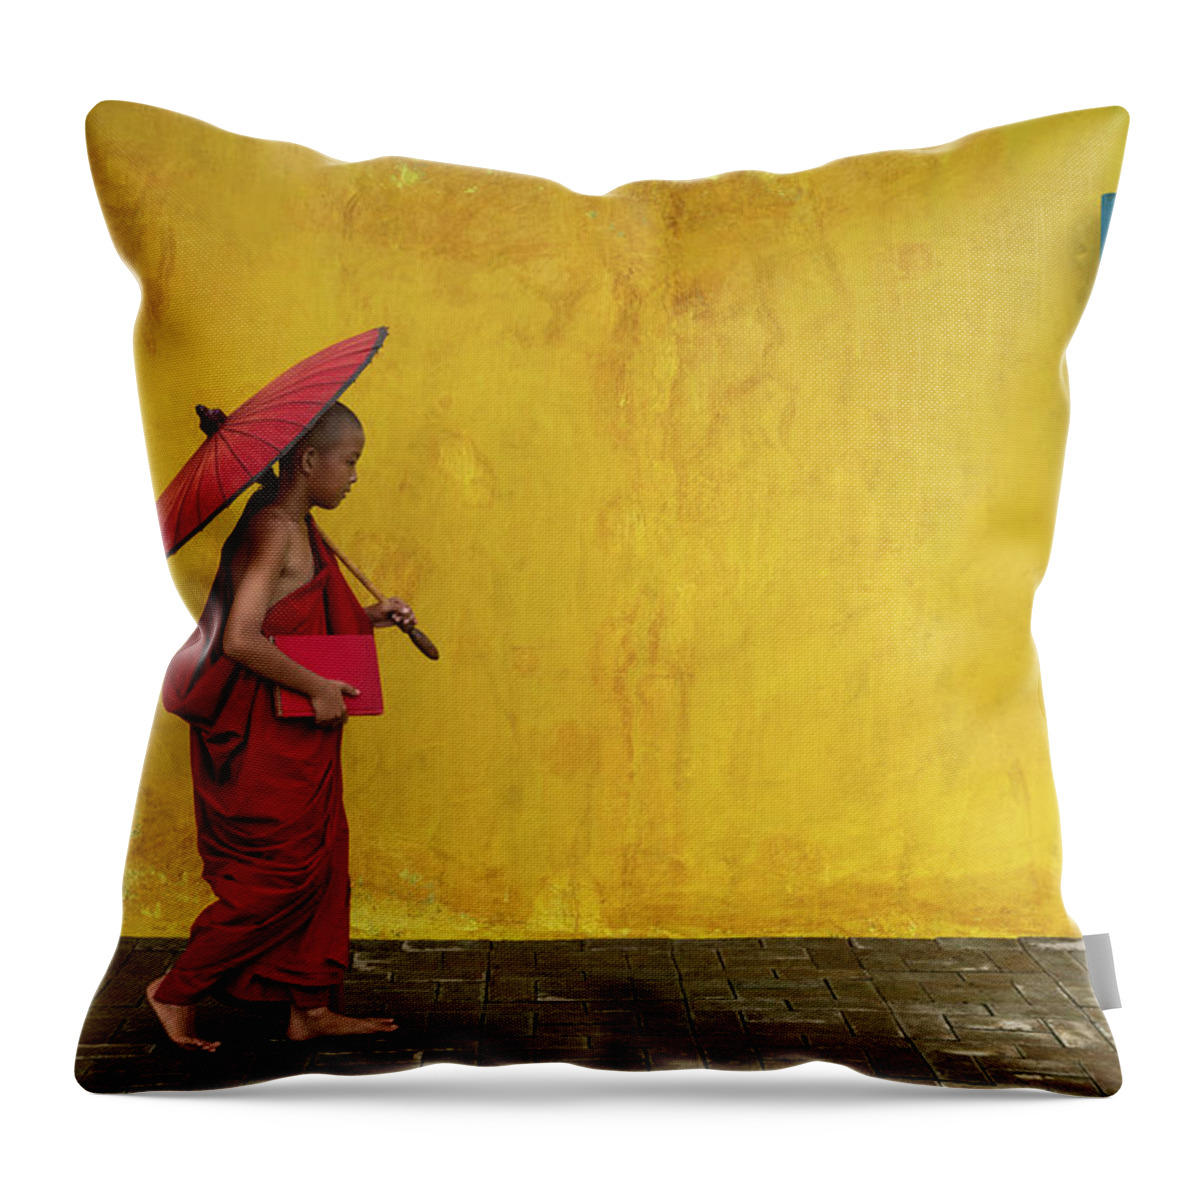 Novice Throw Pillow featuring the photograph A novice monk walking by by Anges Van der Logt